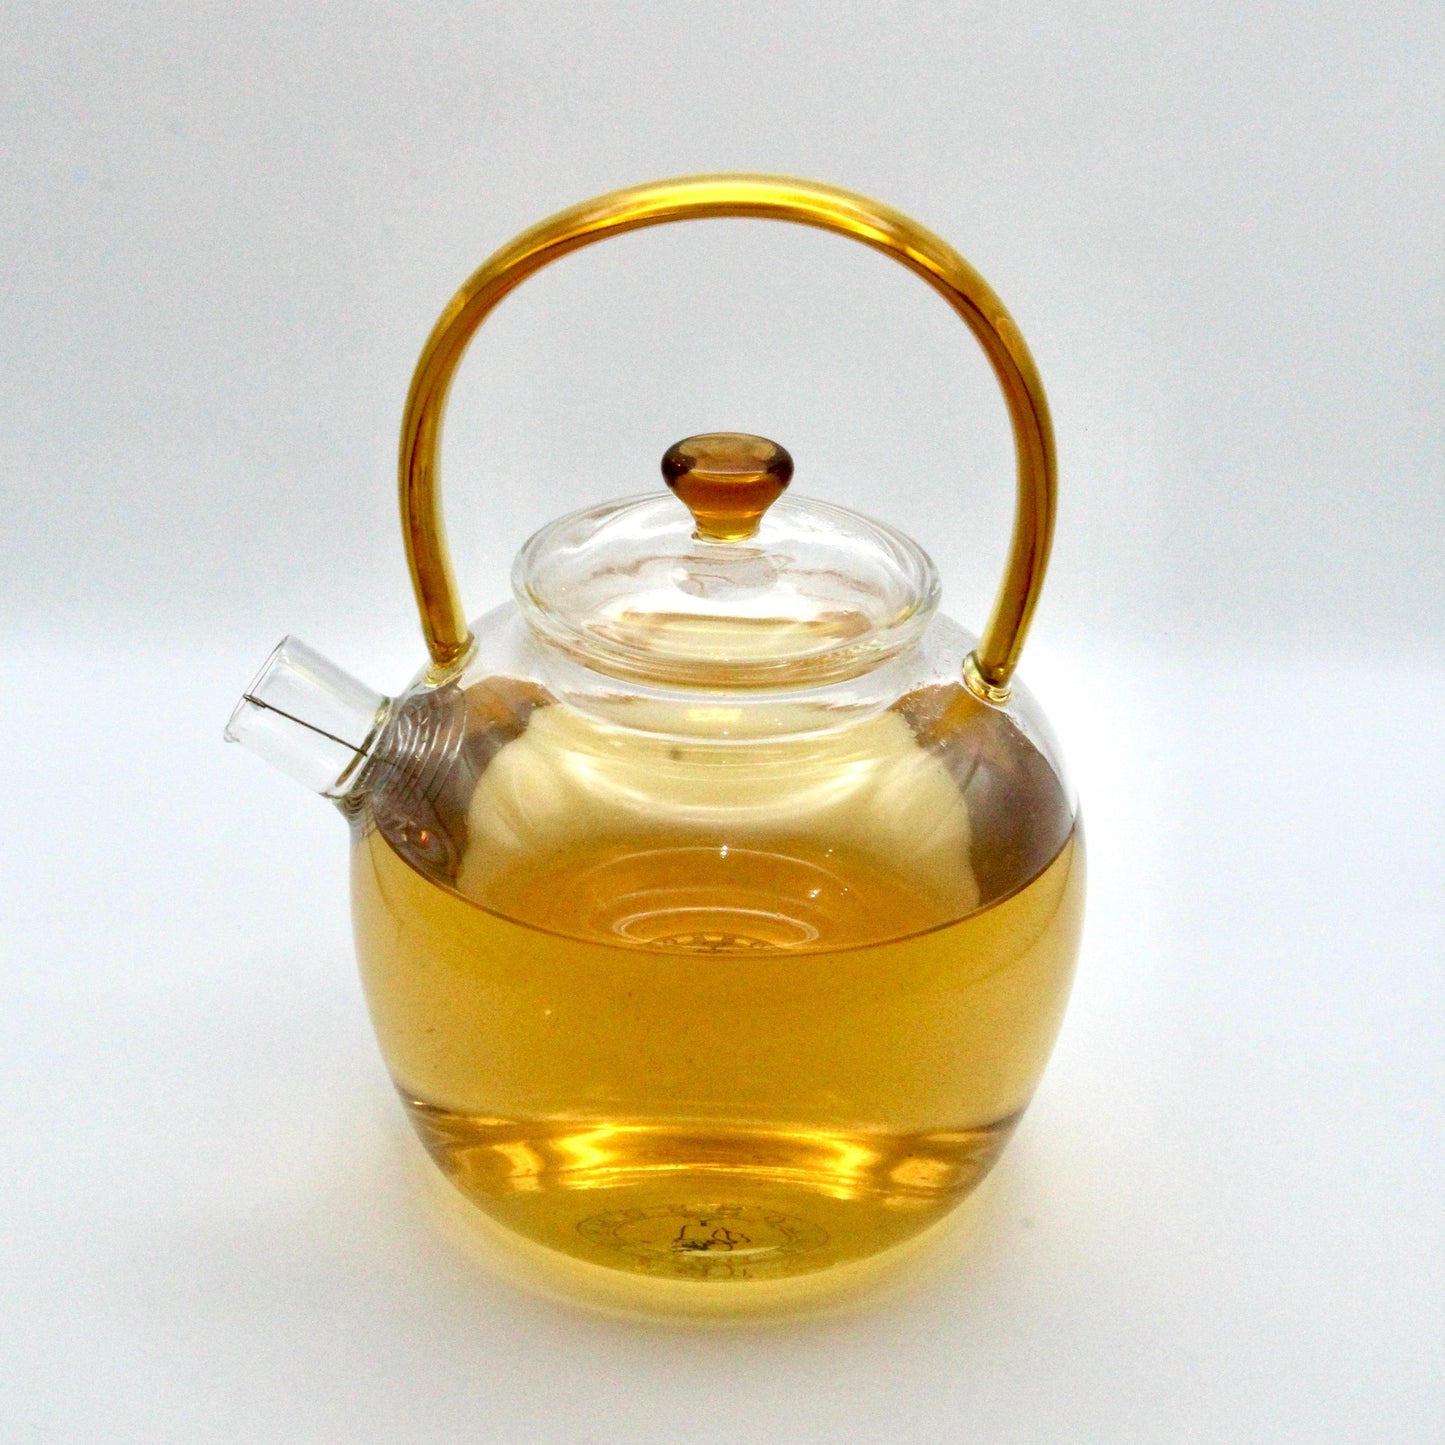 Glass Teapot with Gold Accents - NEW!